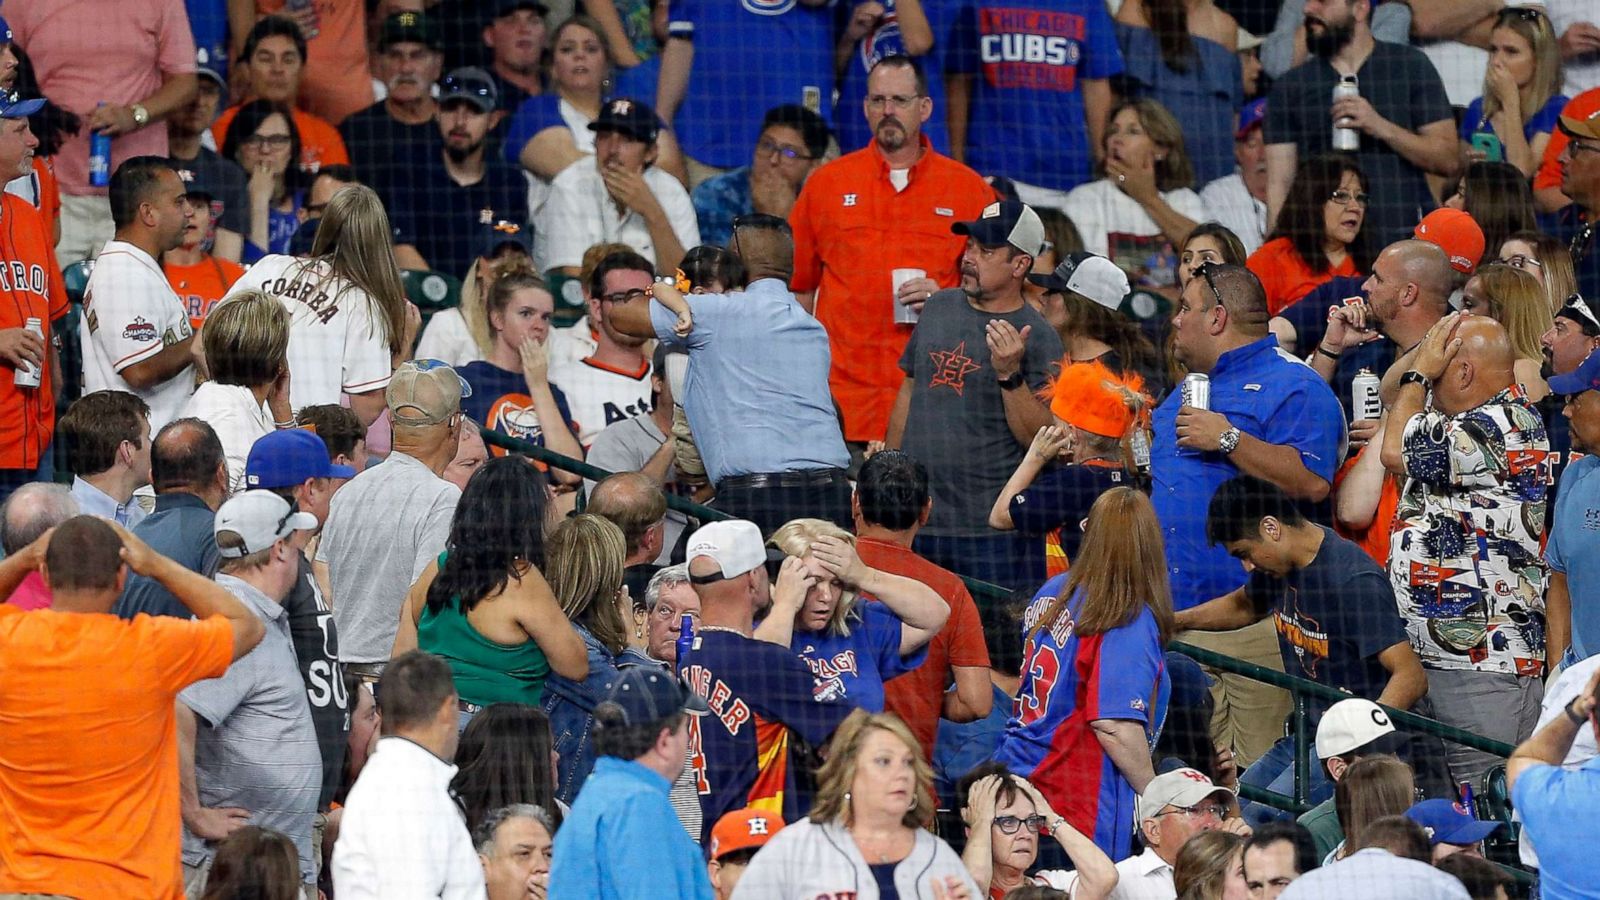 Astros reach settlement with family of girl hit by foul ball